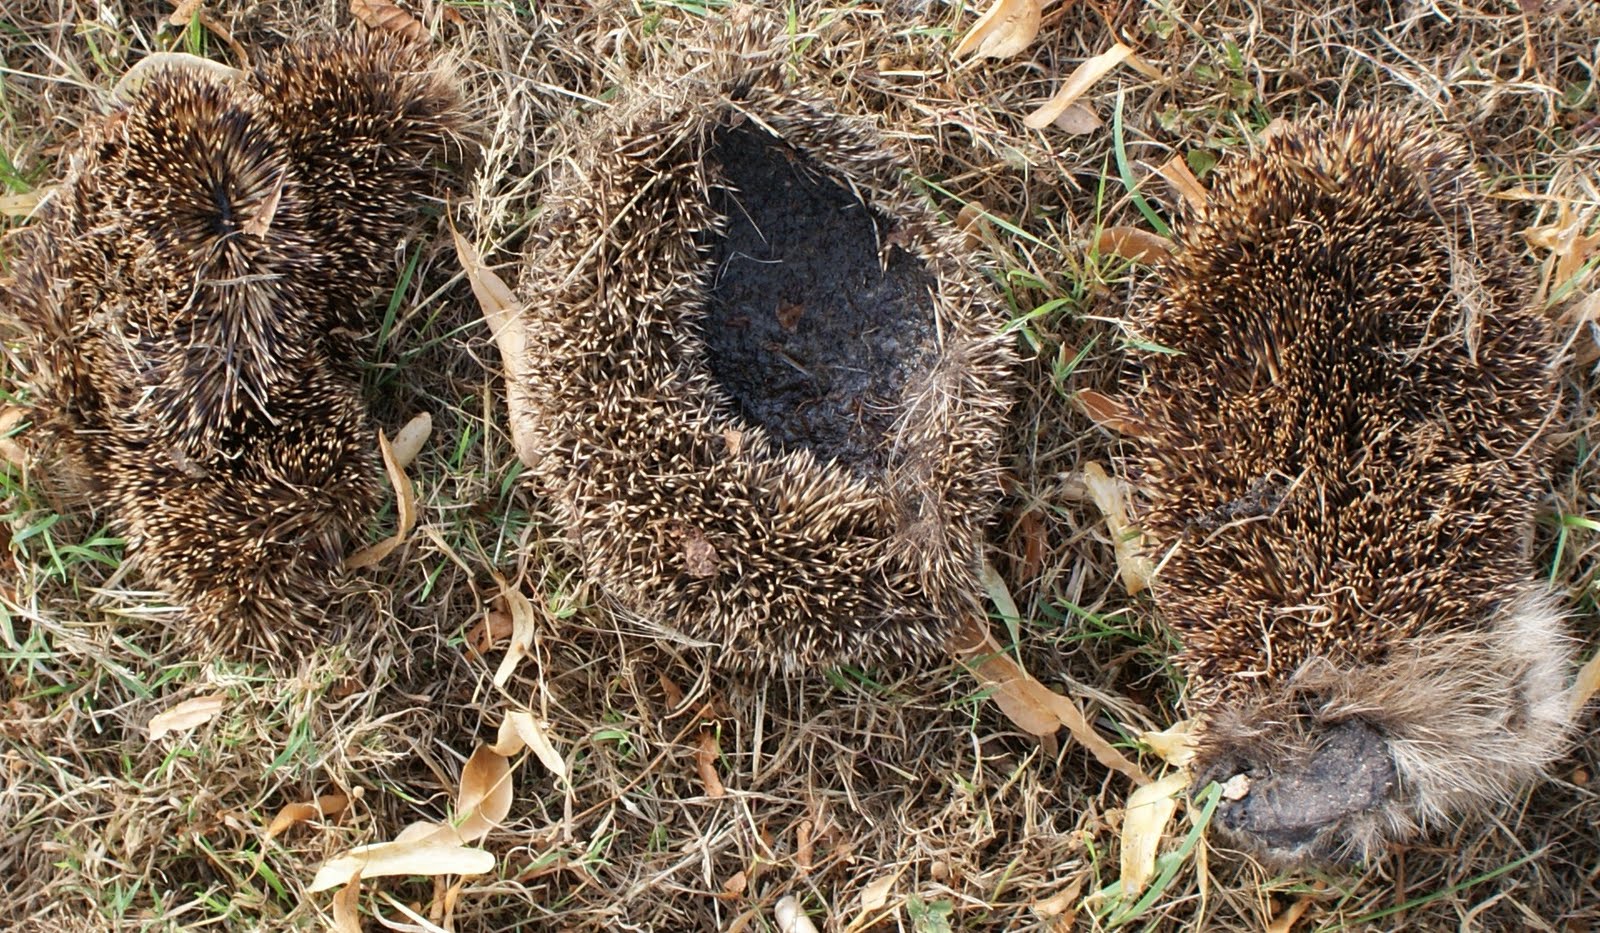 two hedgehogs